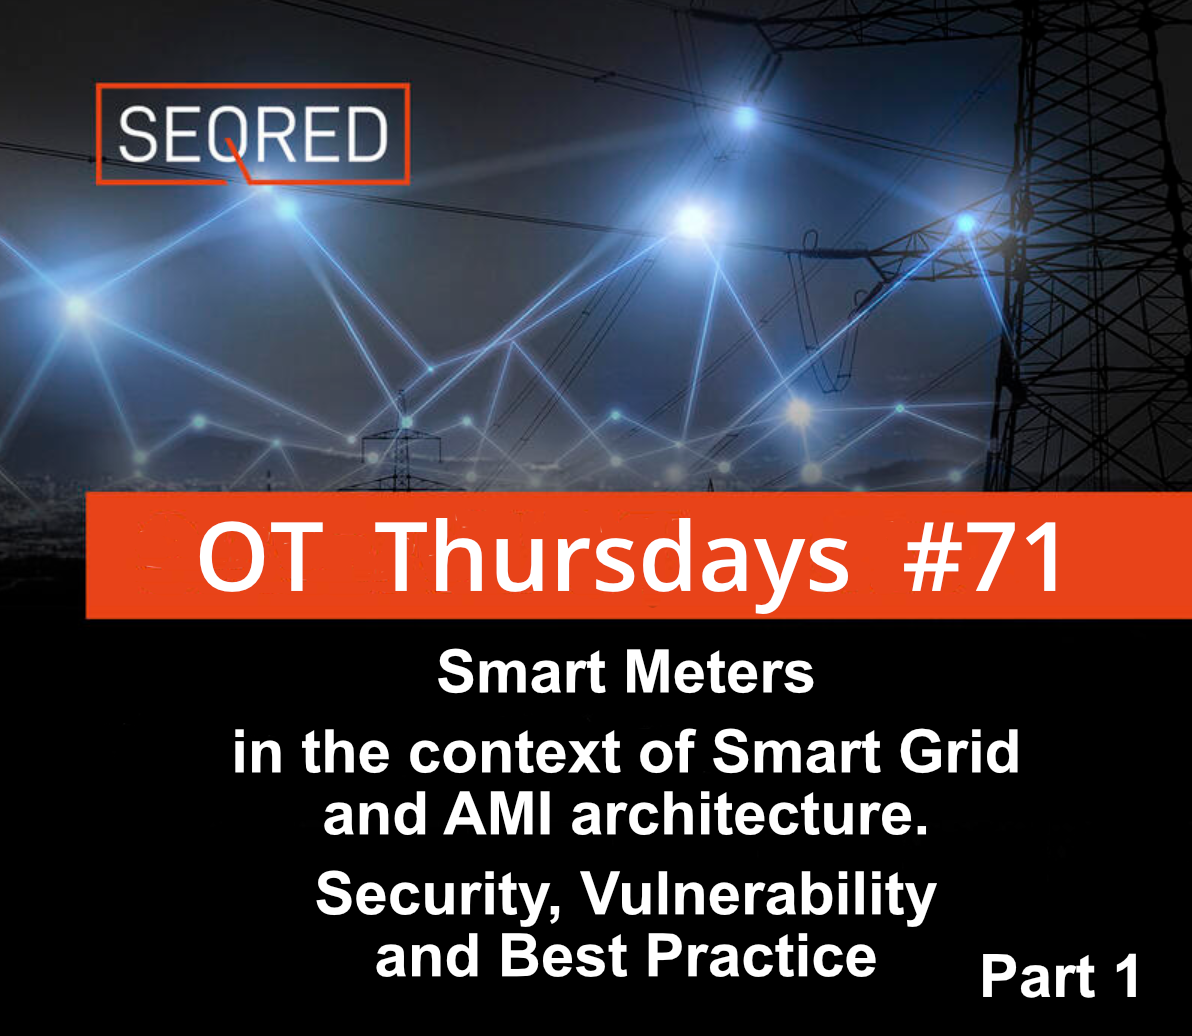 Smart Meters in the context of Smart Grid and AMI architecture. Security, Vulnerability and Best Practice